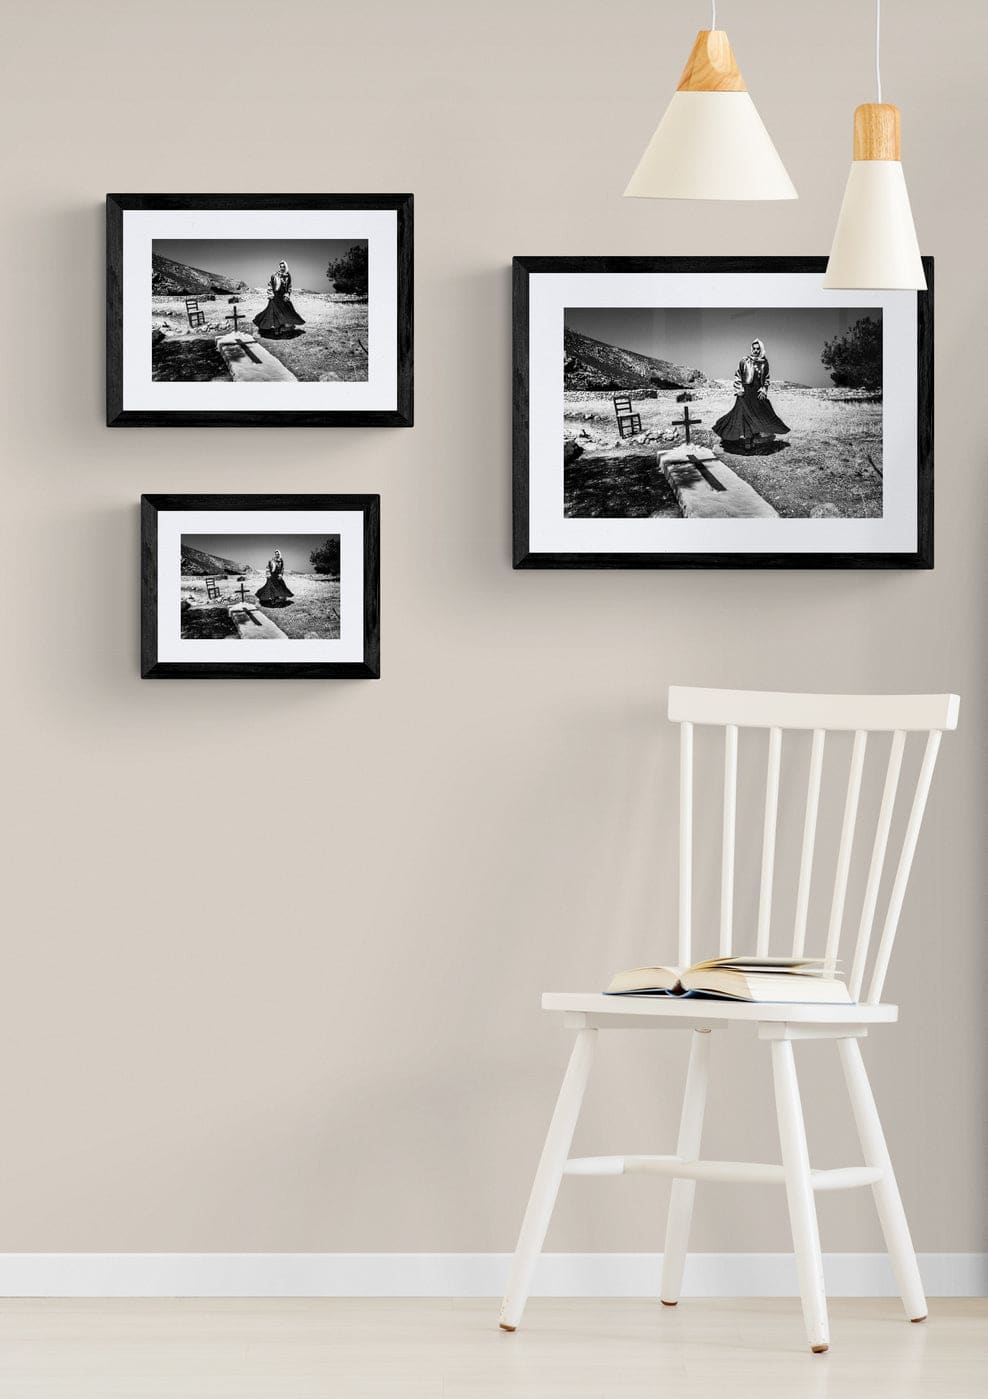 Black and White Photography Wall Art Greece | Monastery Kalymnos Dodecanese by George Tatakis - framing options